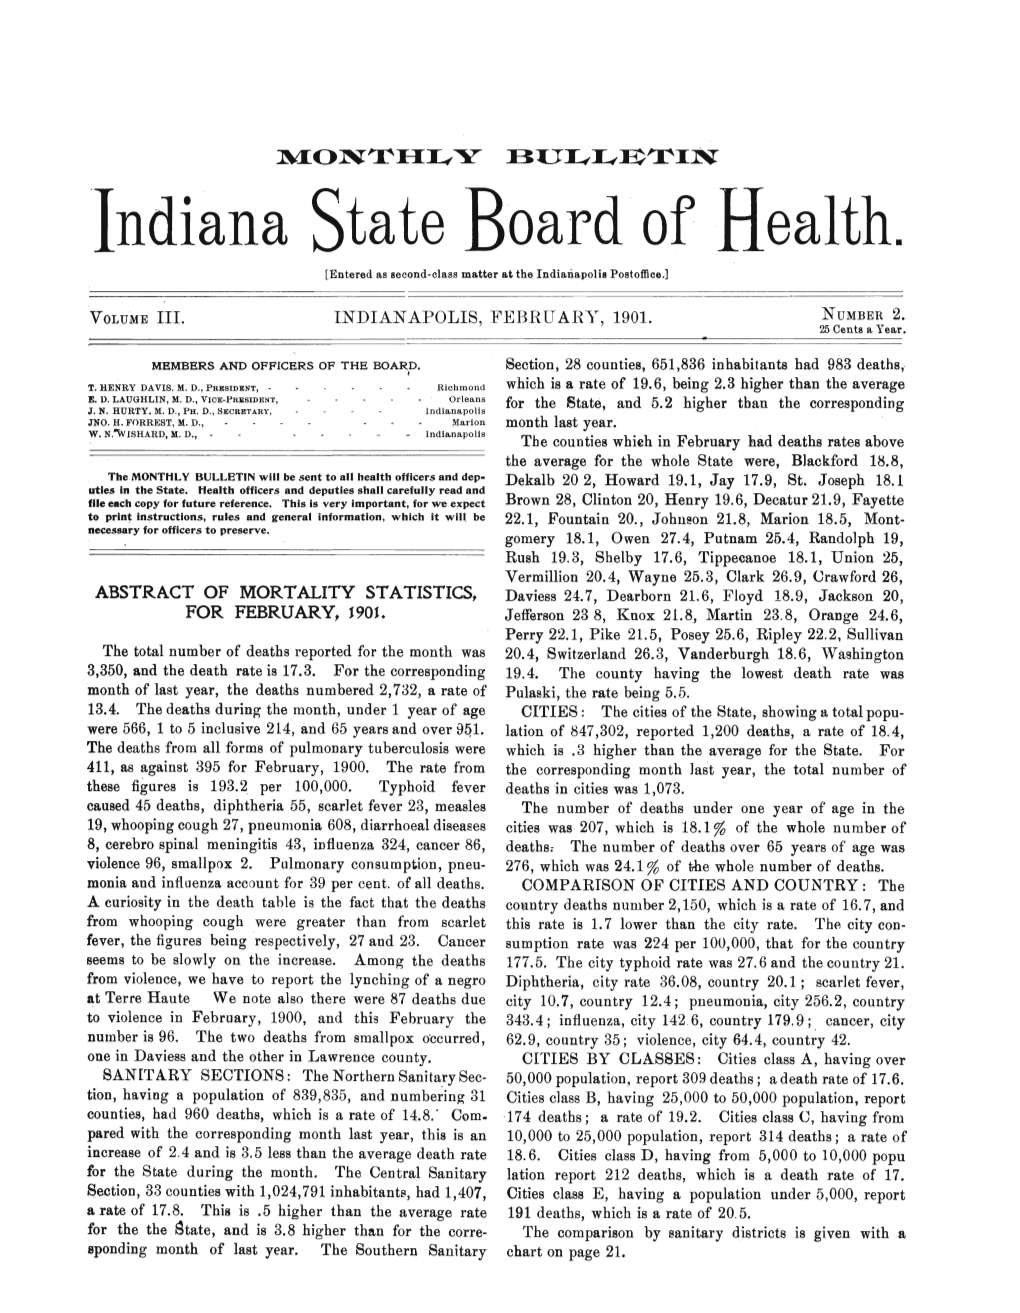 Indianapolis, February, 1901. Abstract of Mortality